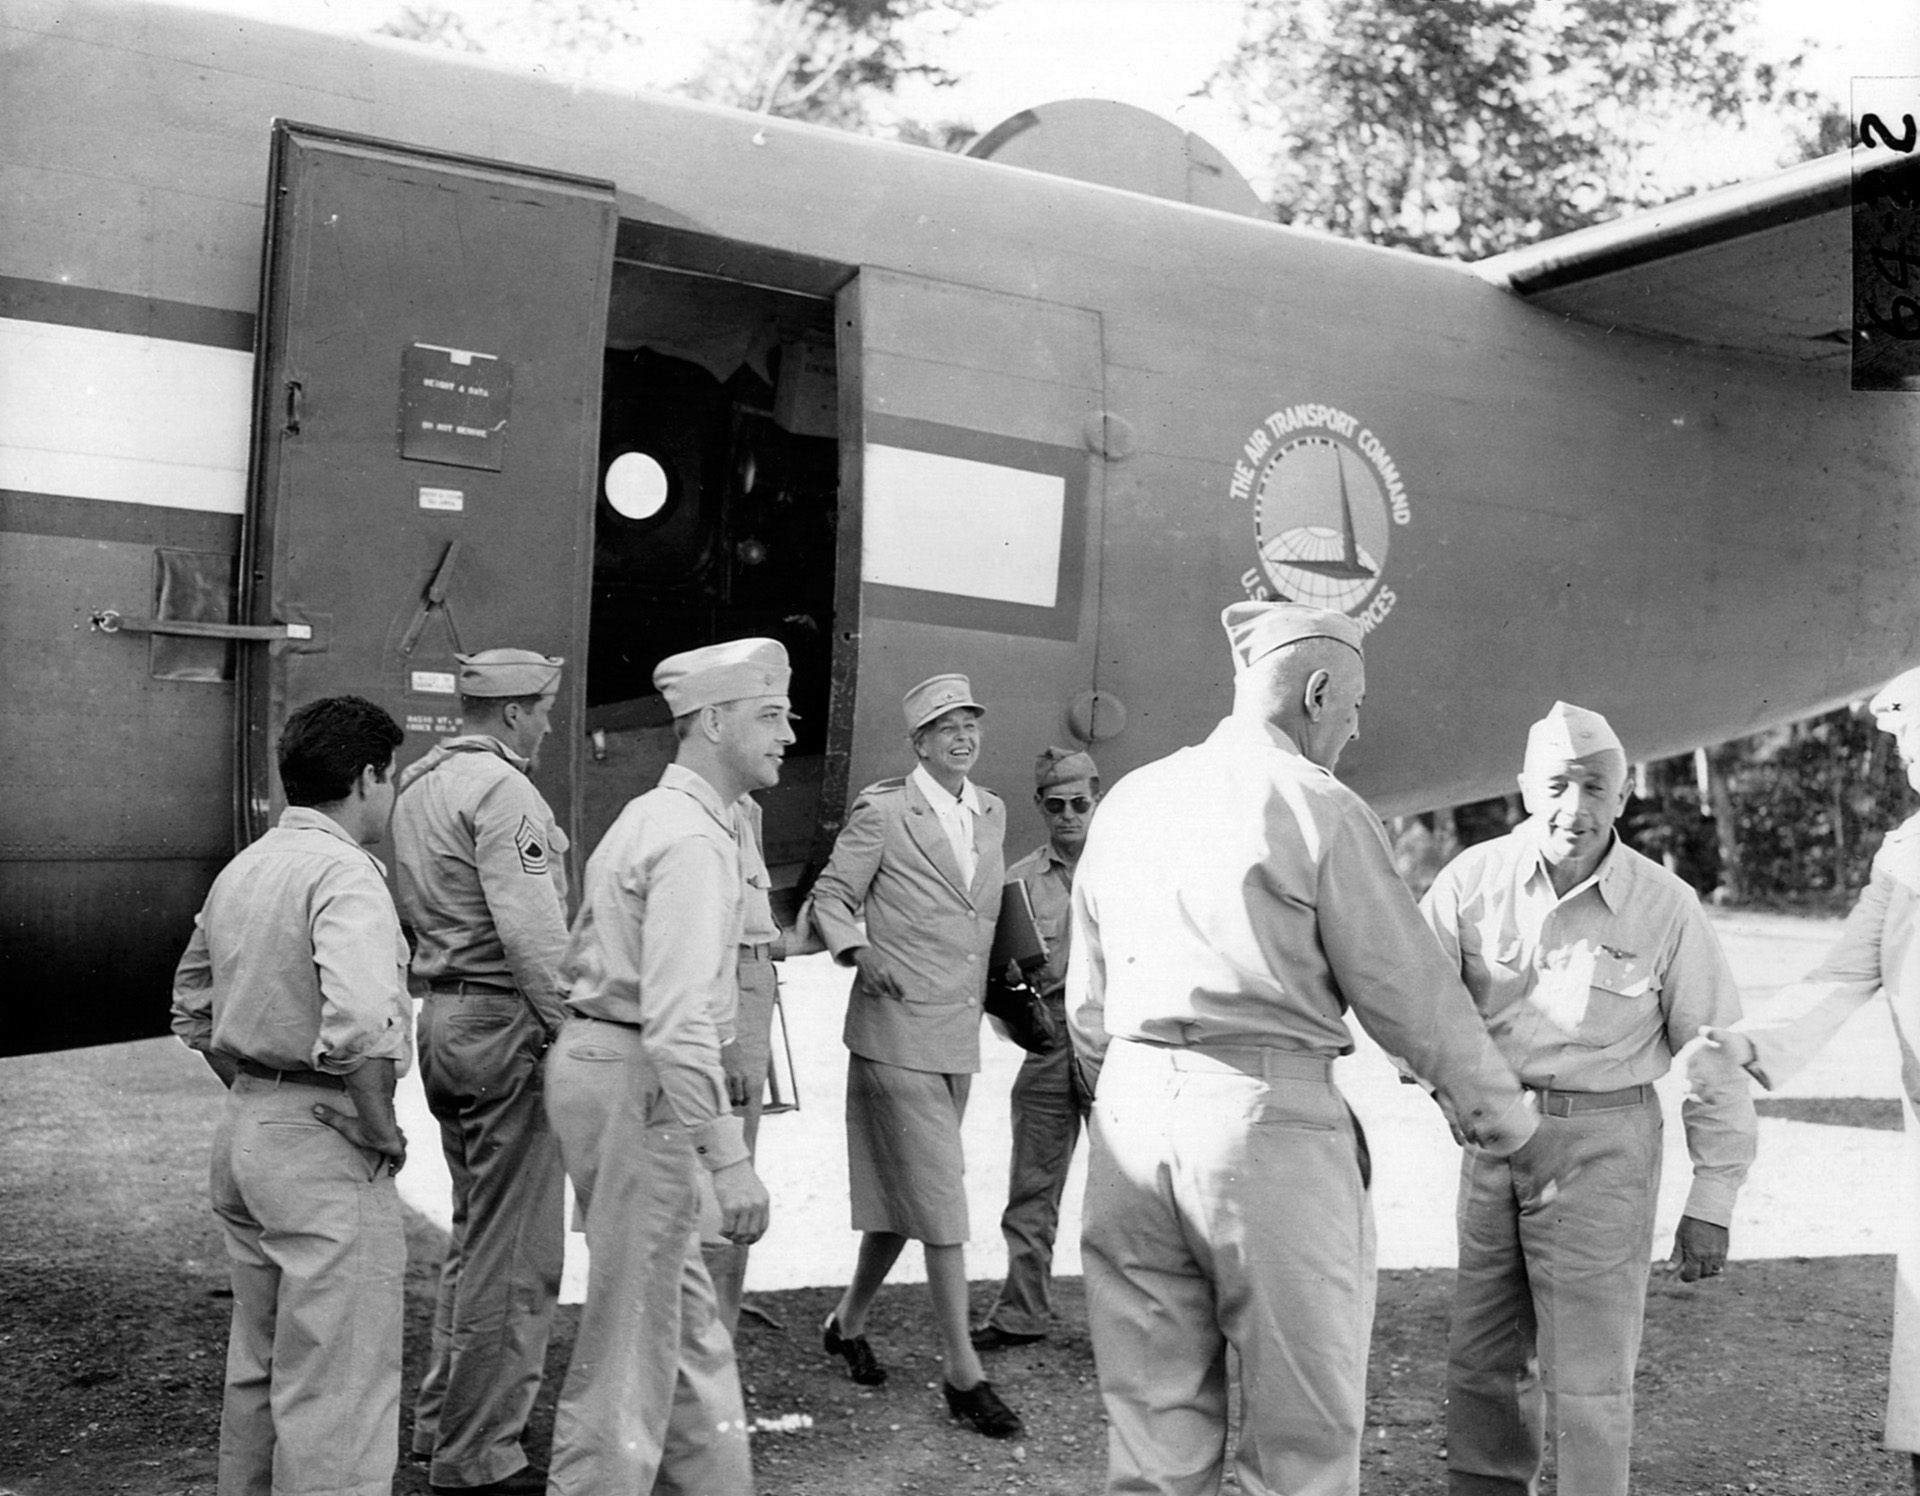 Major General Maxwell Murray (left) and Admiral Aubrey Fitch greet one another as they prepare to welcome First Lady Eleanor Roosevelt, exiting the aircraft, to Espiritu Santo in the New Hebrides, 1942.